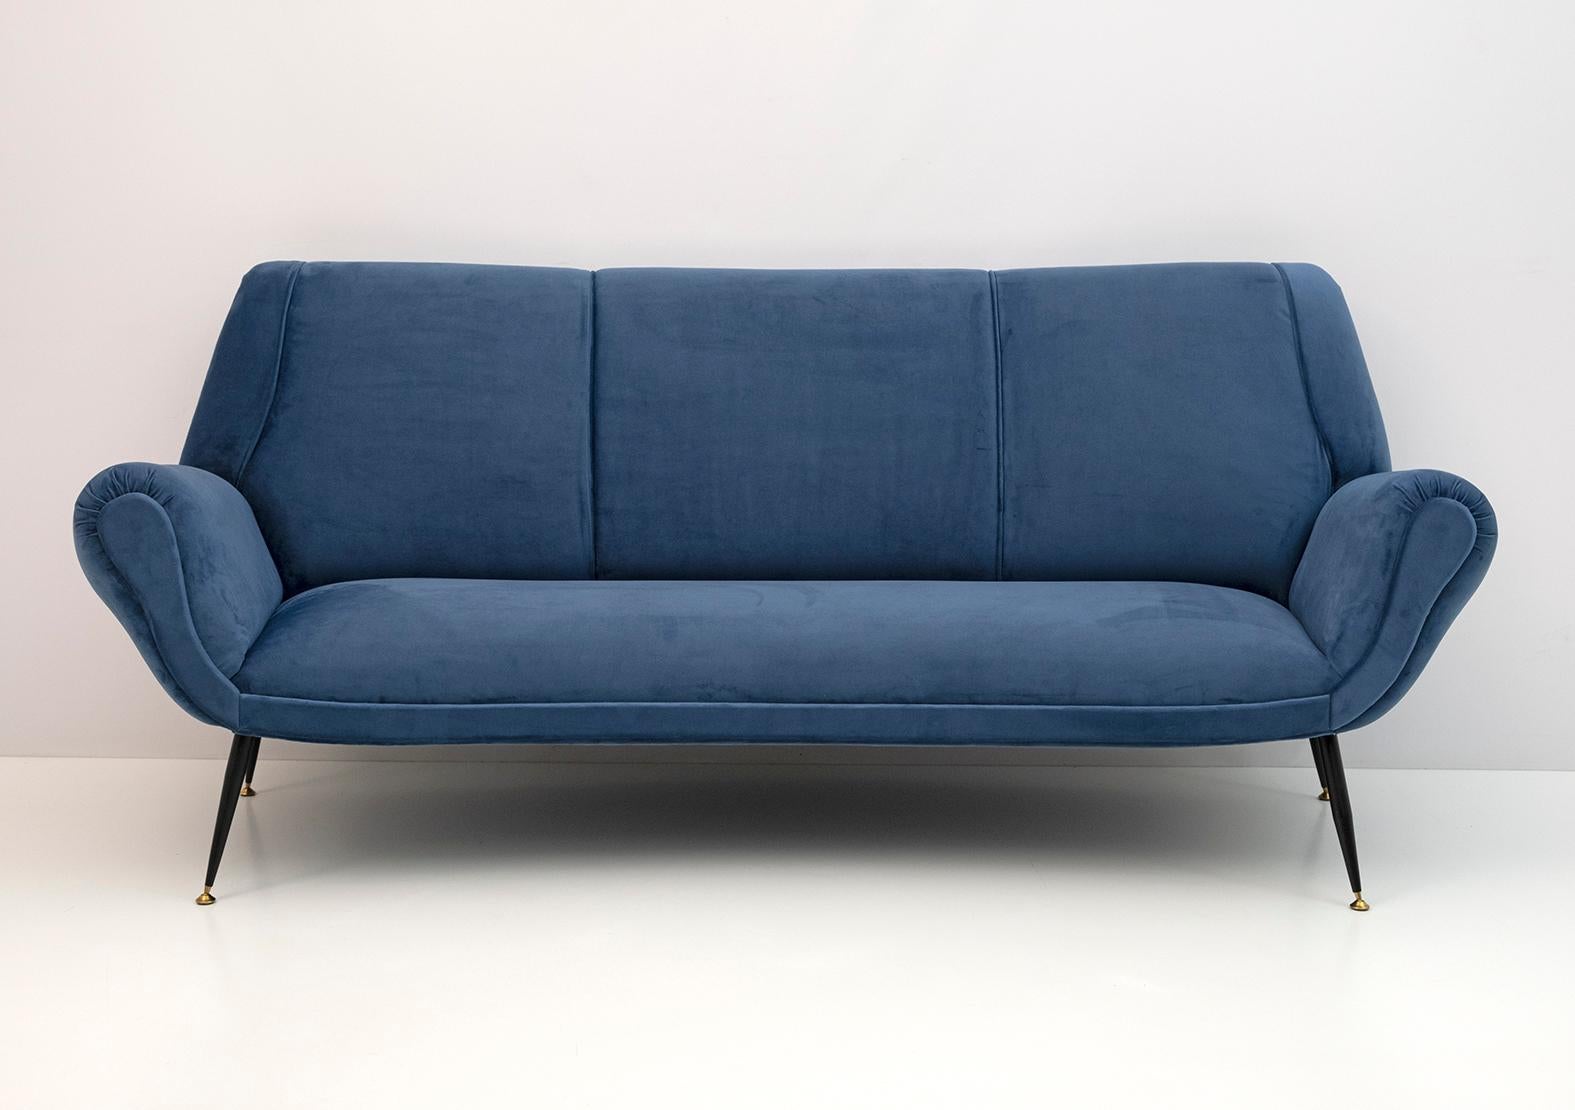 Curved sofa designed by Gigi Radice for Minotti. It was made with a solid wood structure and blue velvet upholstery with metal and brass legs. The structure is authentic, only the upholstery and the padding has been replaced.